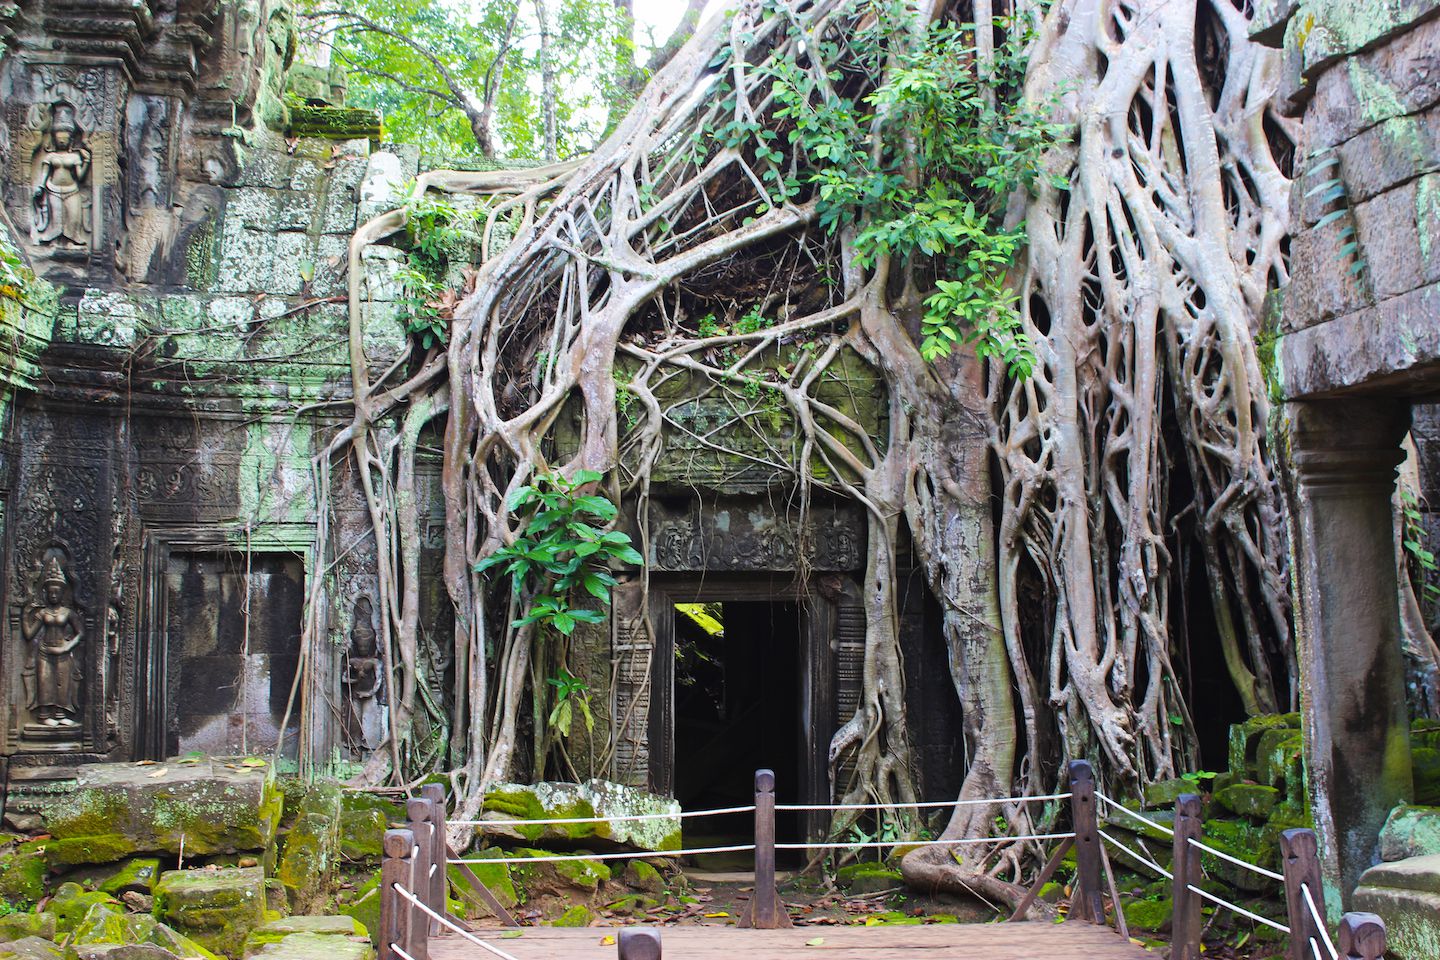 This is where Angelina Jolie appears as Lara Croft during her scene in Tomb Raider